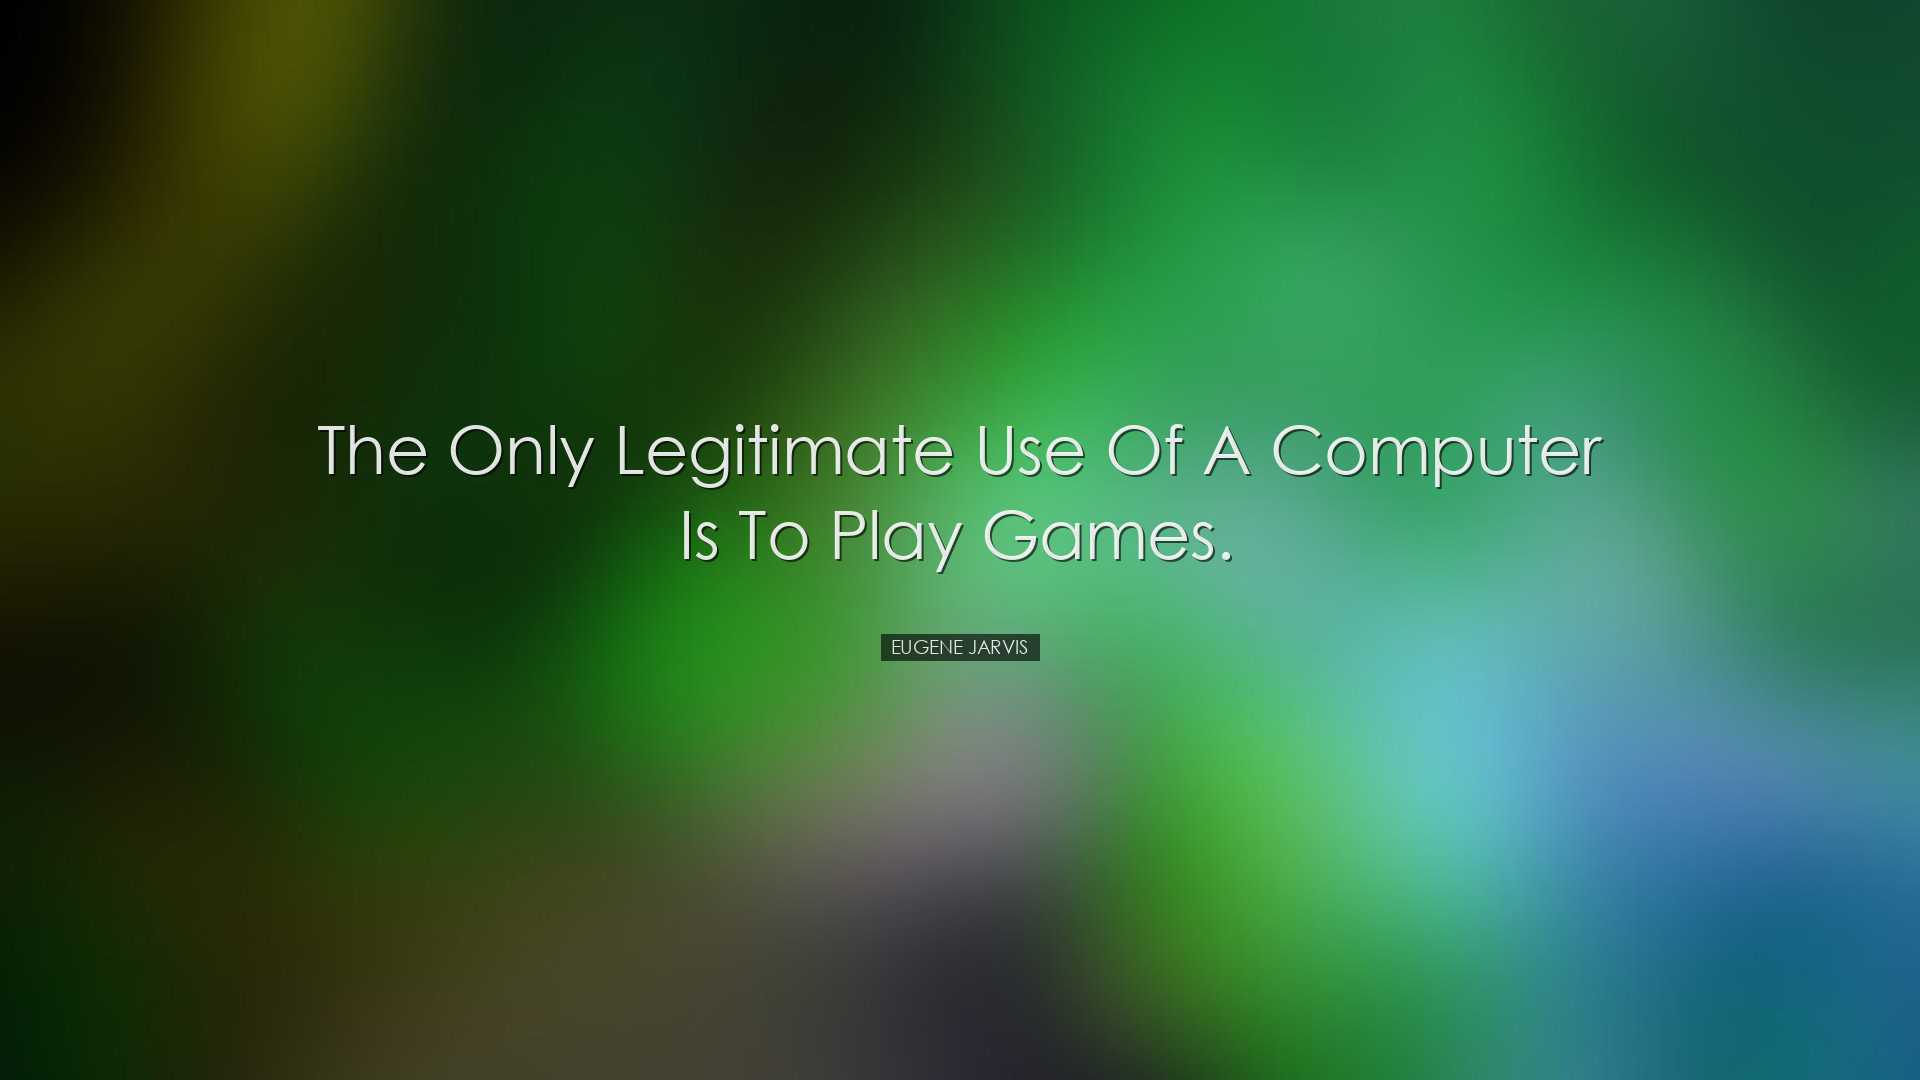 The only legitimate use of a computer is to play games. - Eugene J